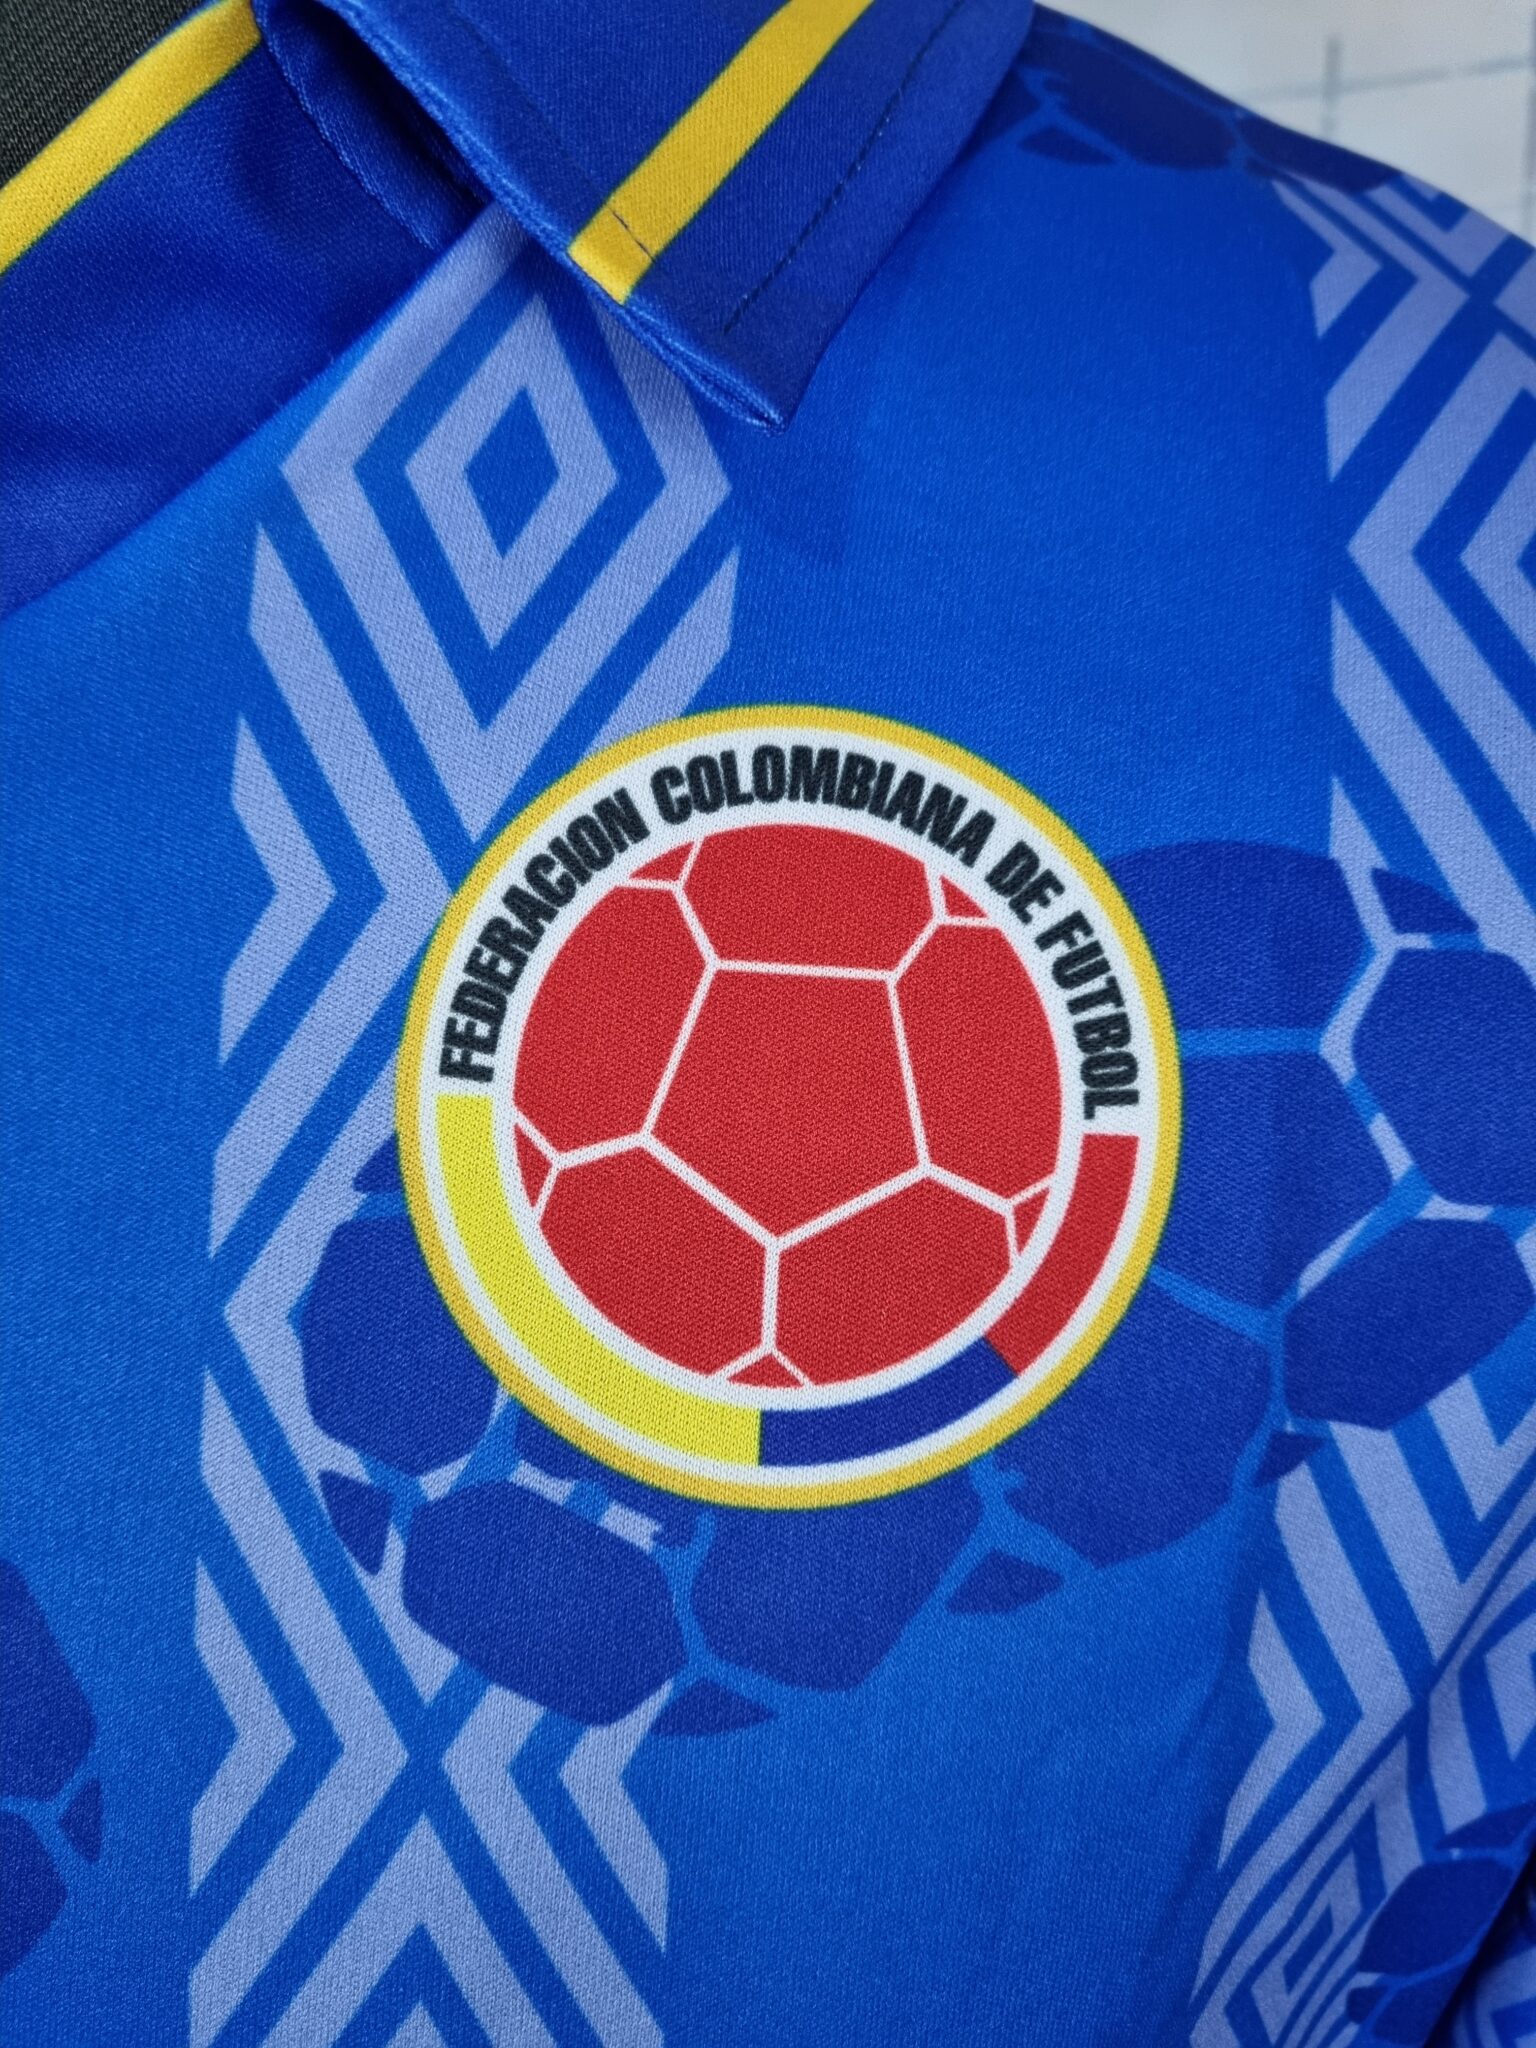 Colombia National Team 1994 Away Shirt Vintage Jersey Retro World Cup - Sport Club Memories